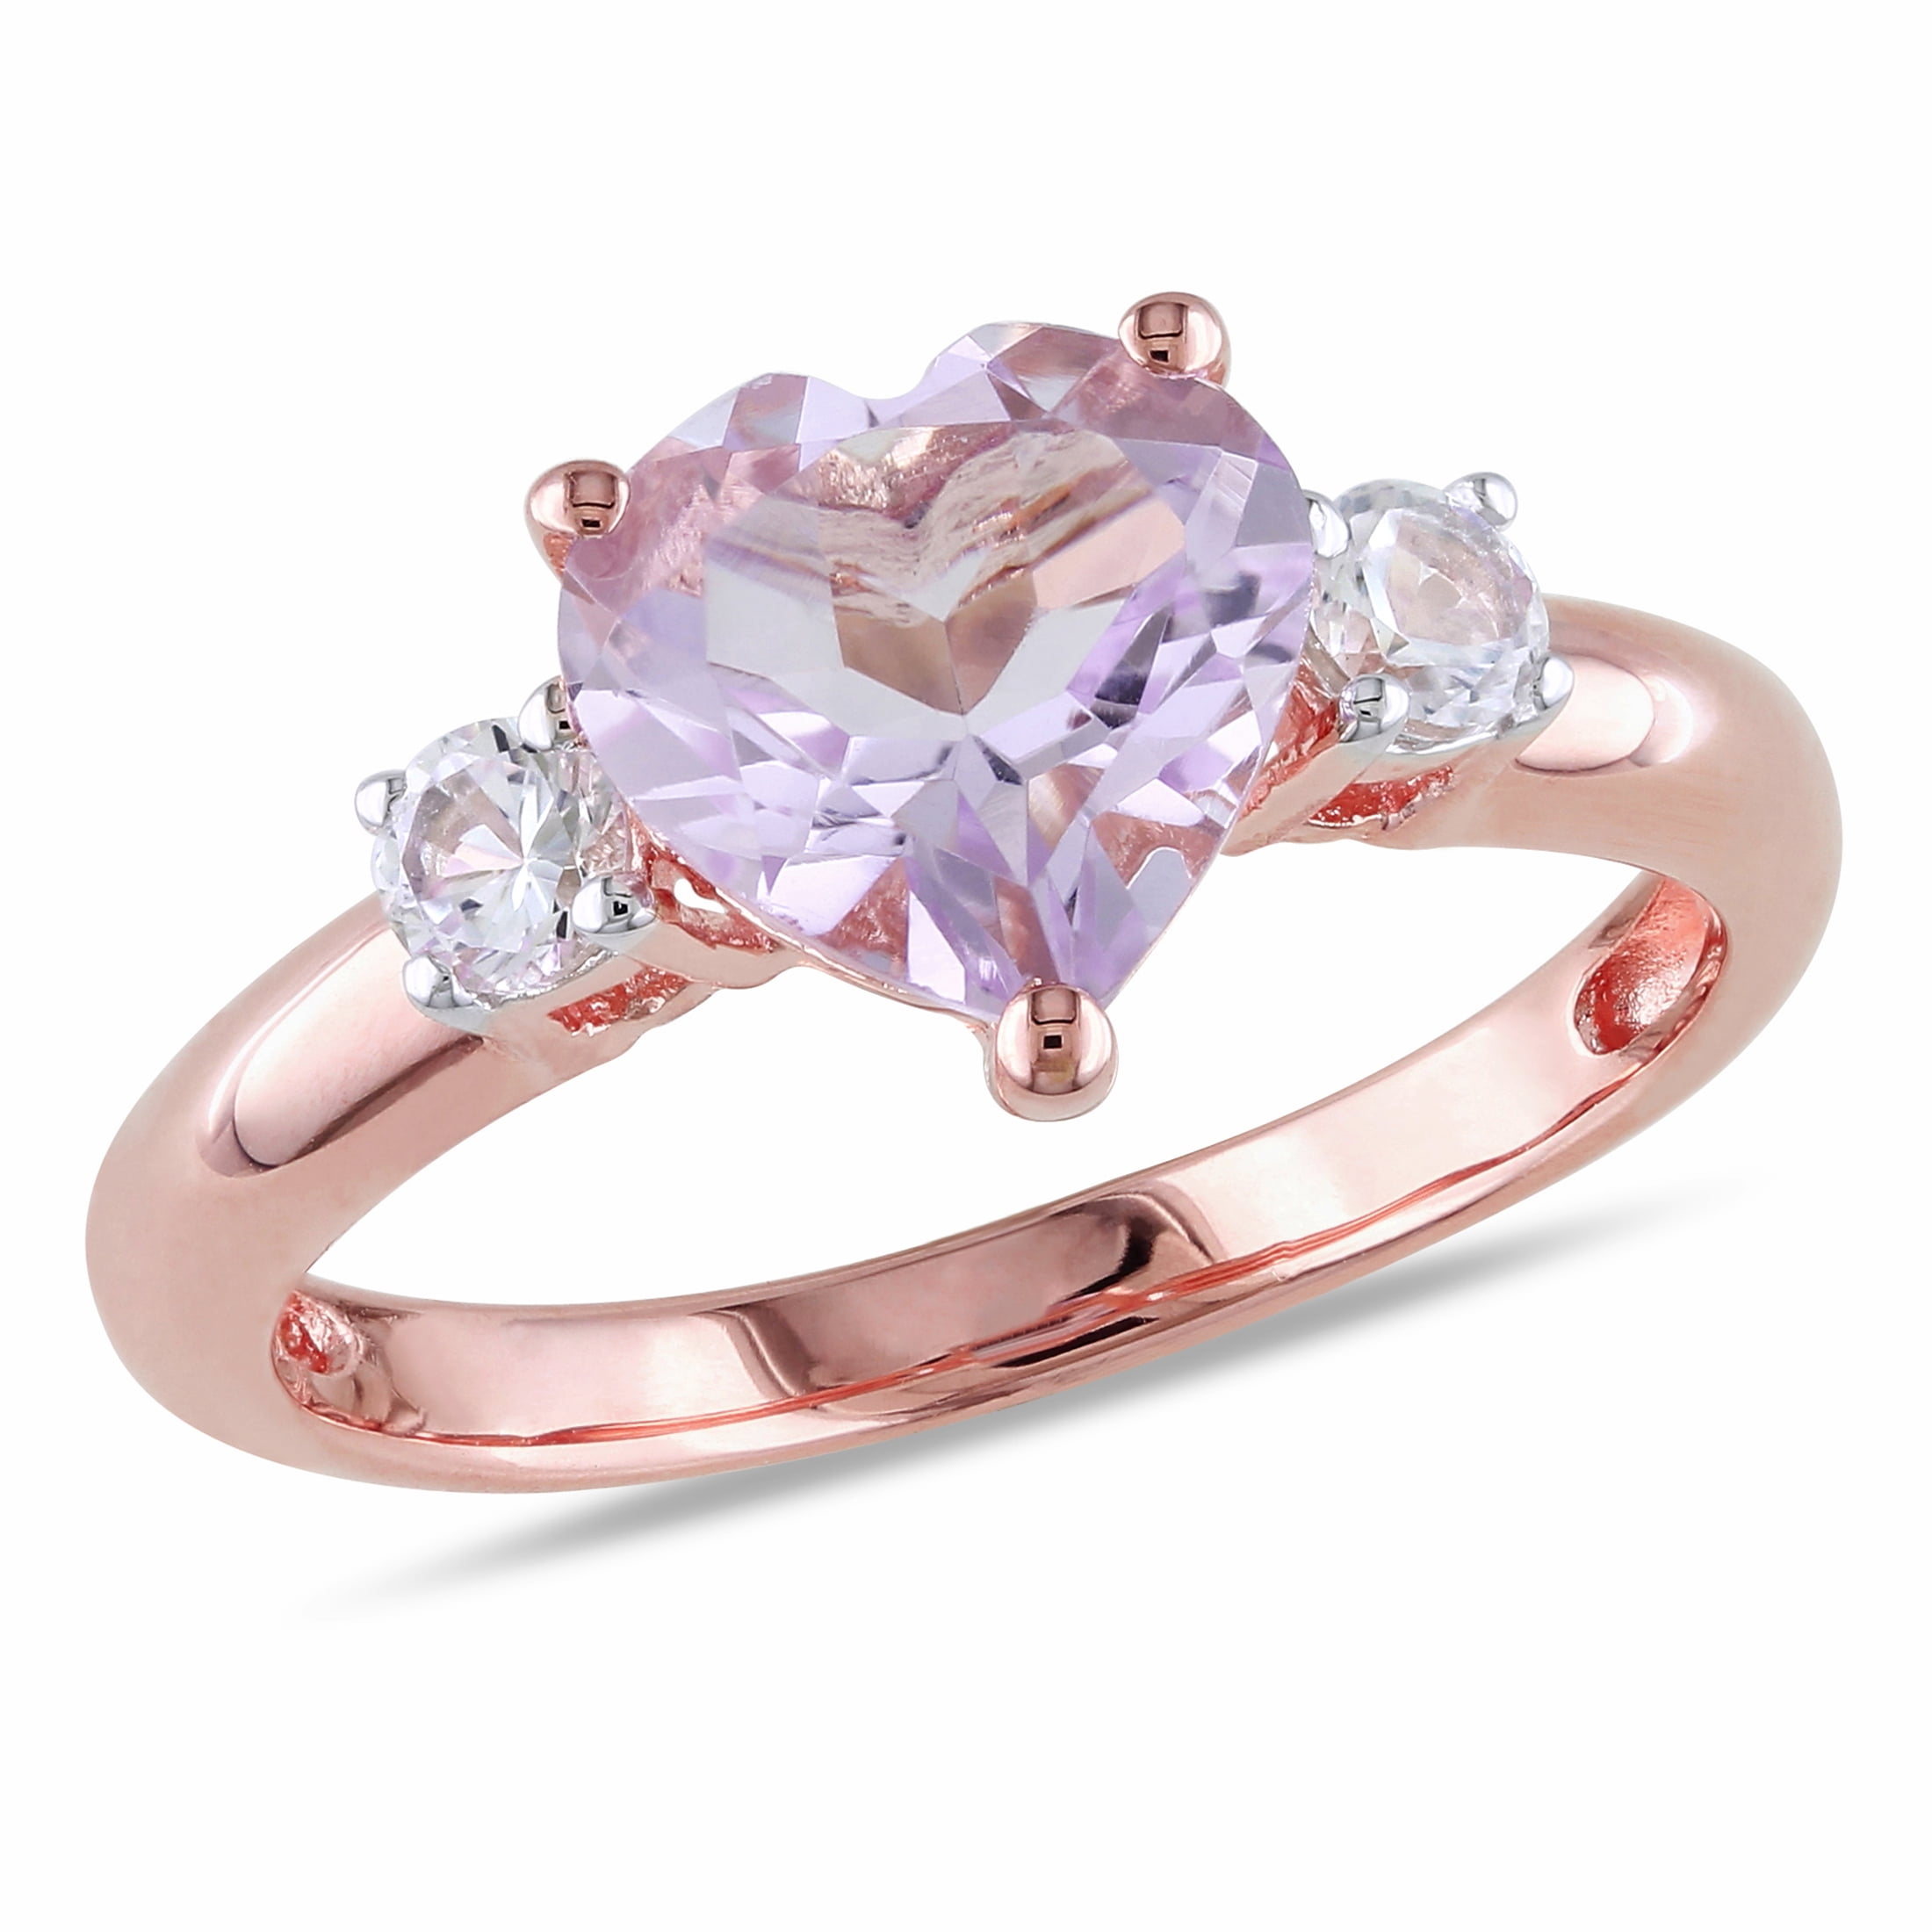 Buy Unique Multi Stone Rose Quartz Ring Sterling Silver Heart Shaped  Engagement Ring Freeform Ring Online in India - Etsy